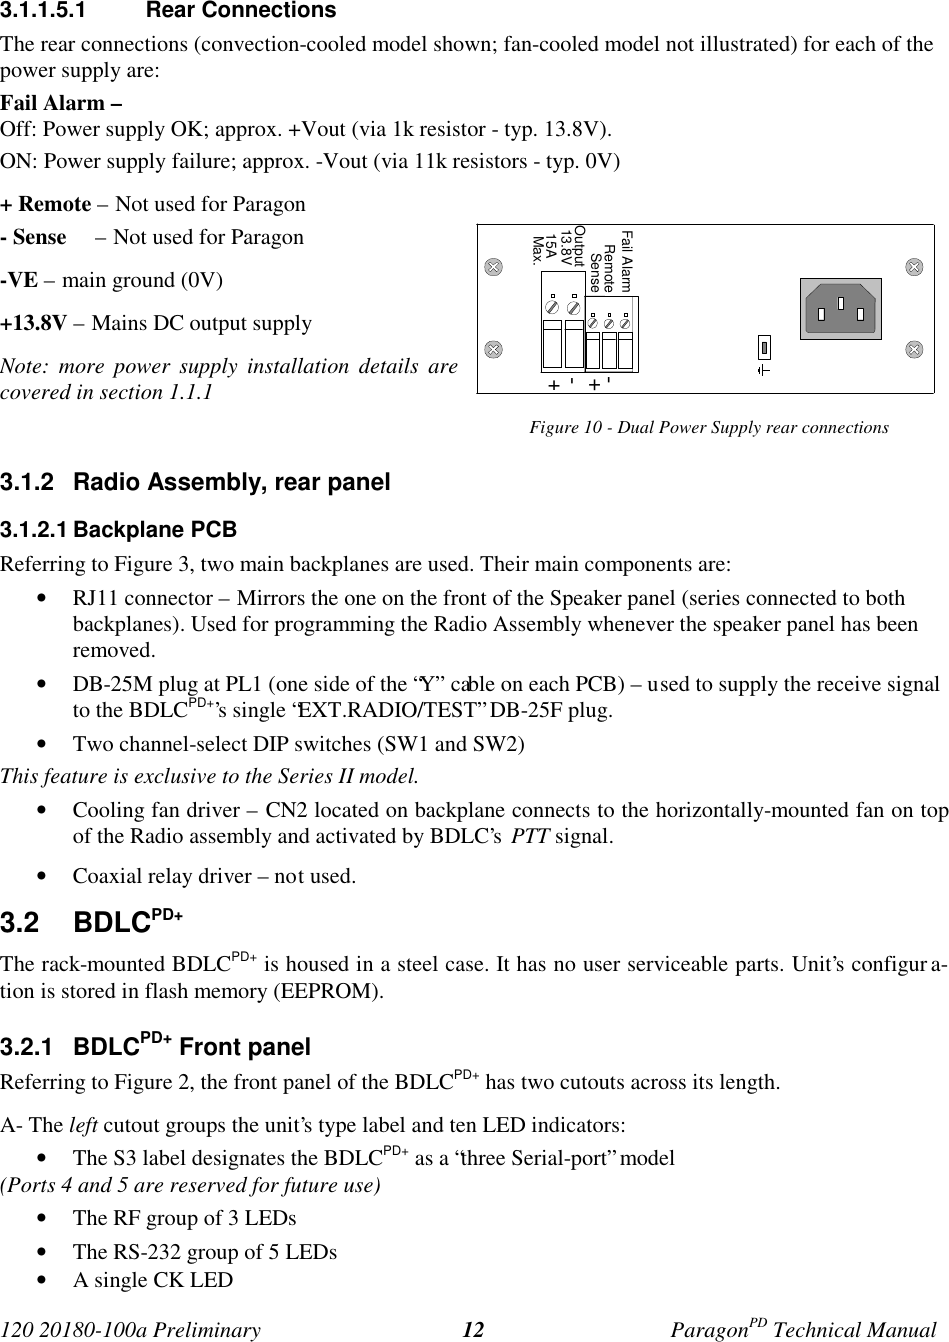 Page 19 of CalAmp Wireless Networks BDD4T881-3 ParagonPD User Manual Parg PD  T100a Prelim